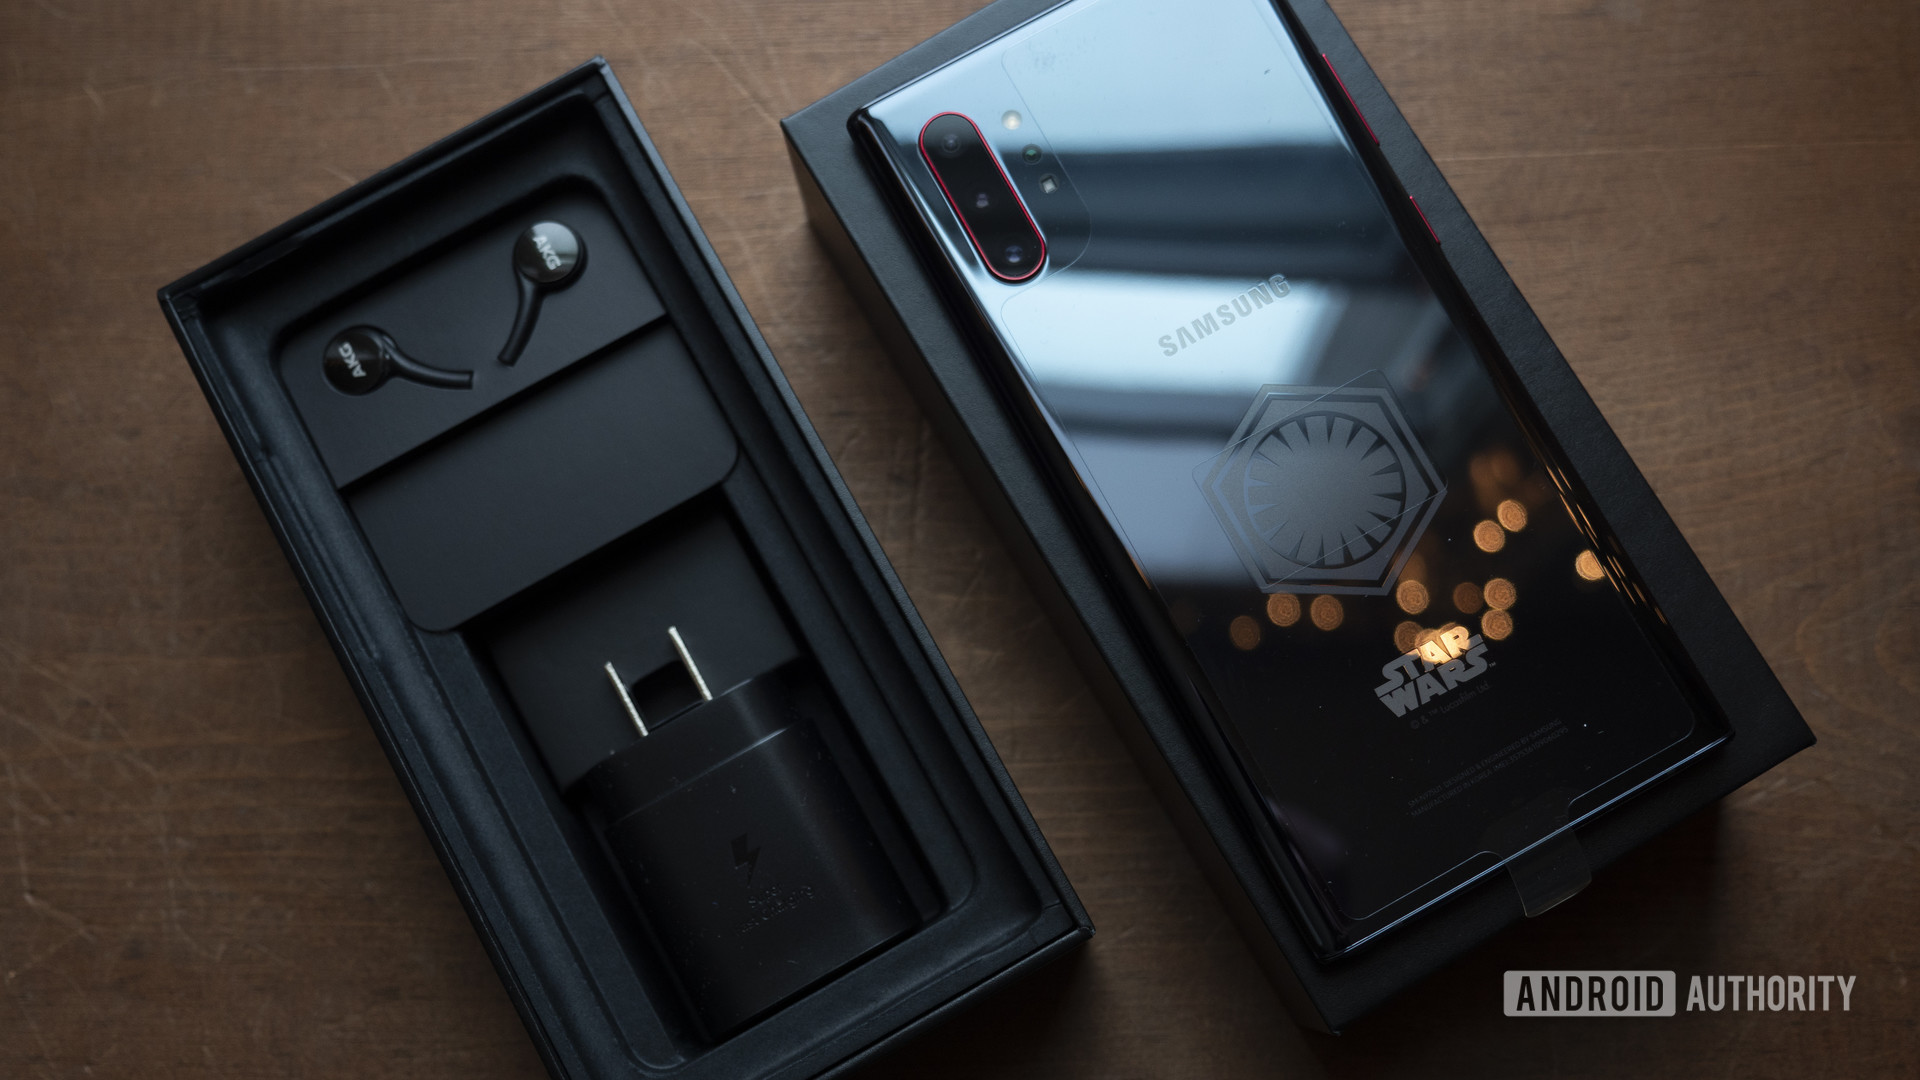 samsung galaxy note 10 plus star wars edition phone and box contents